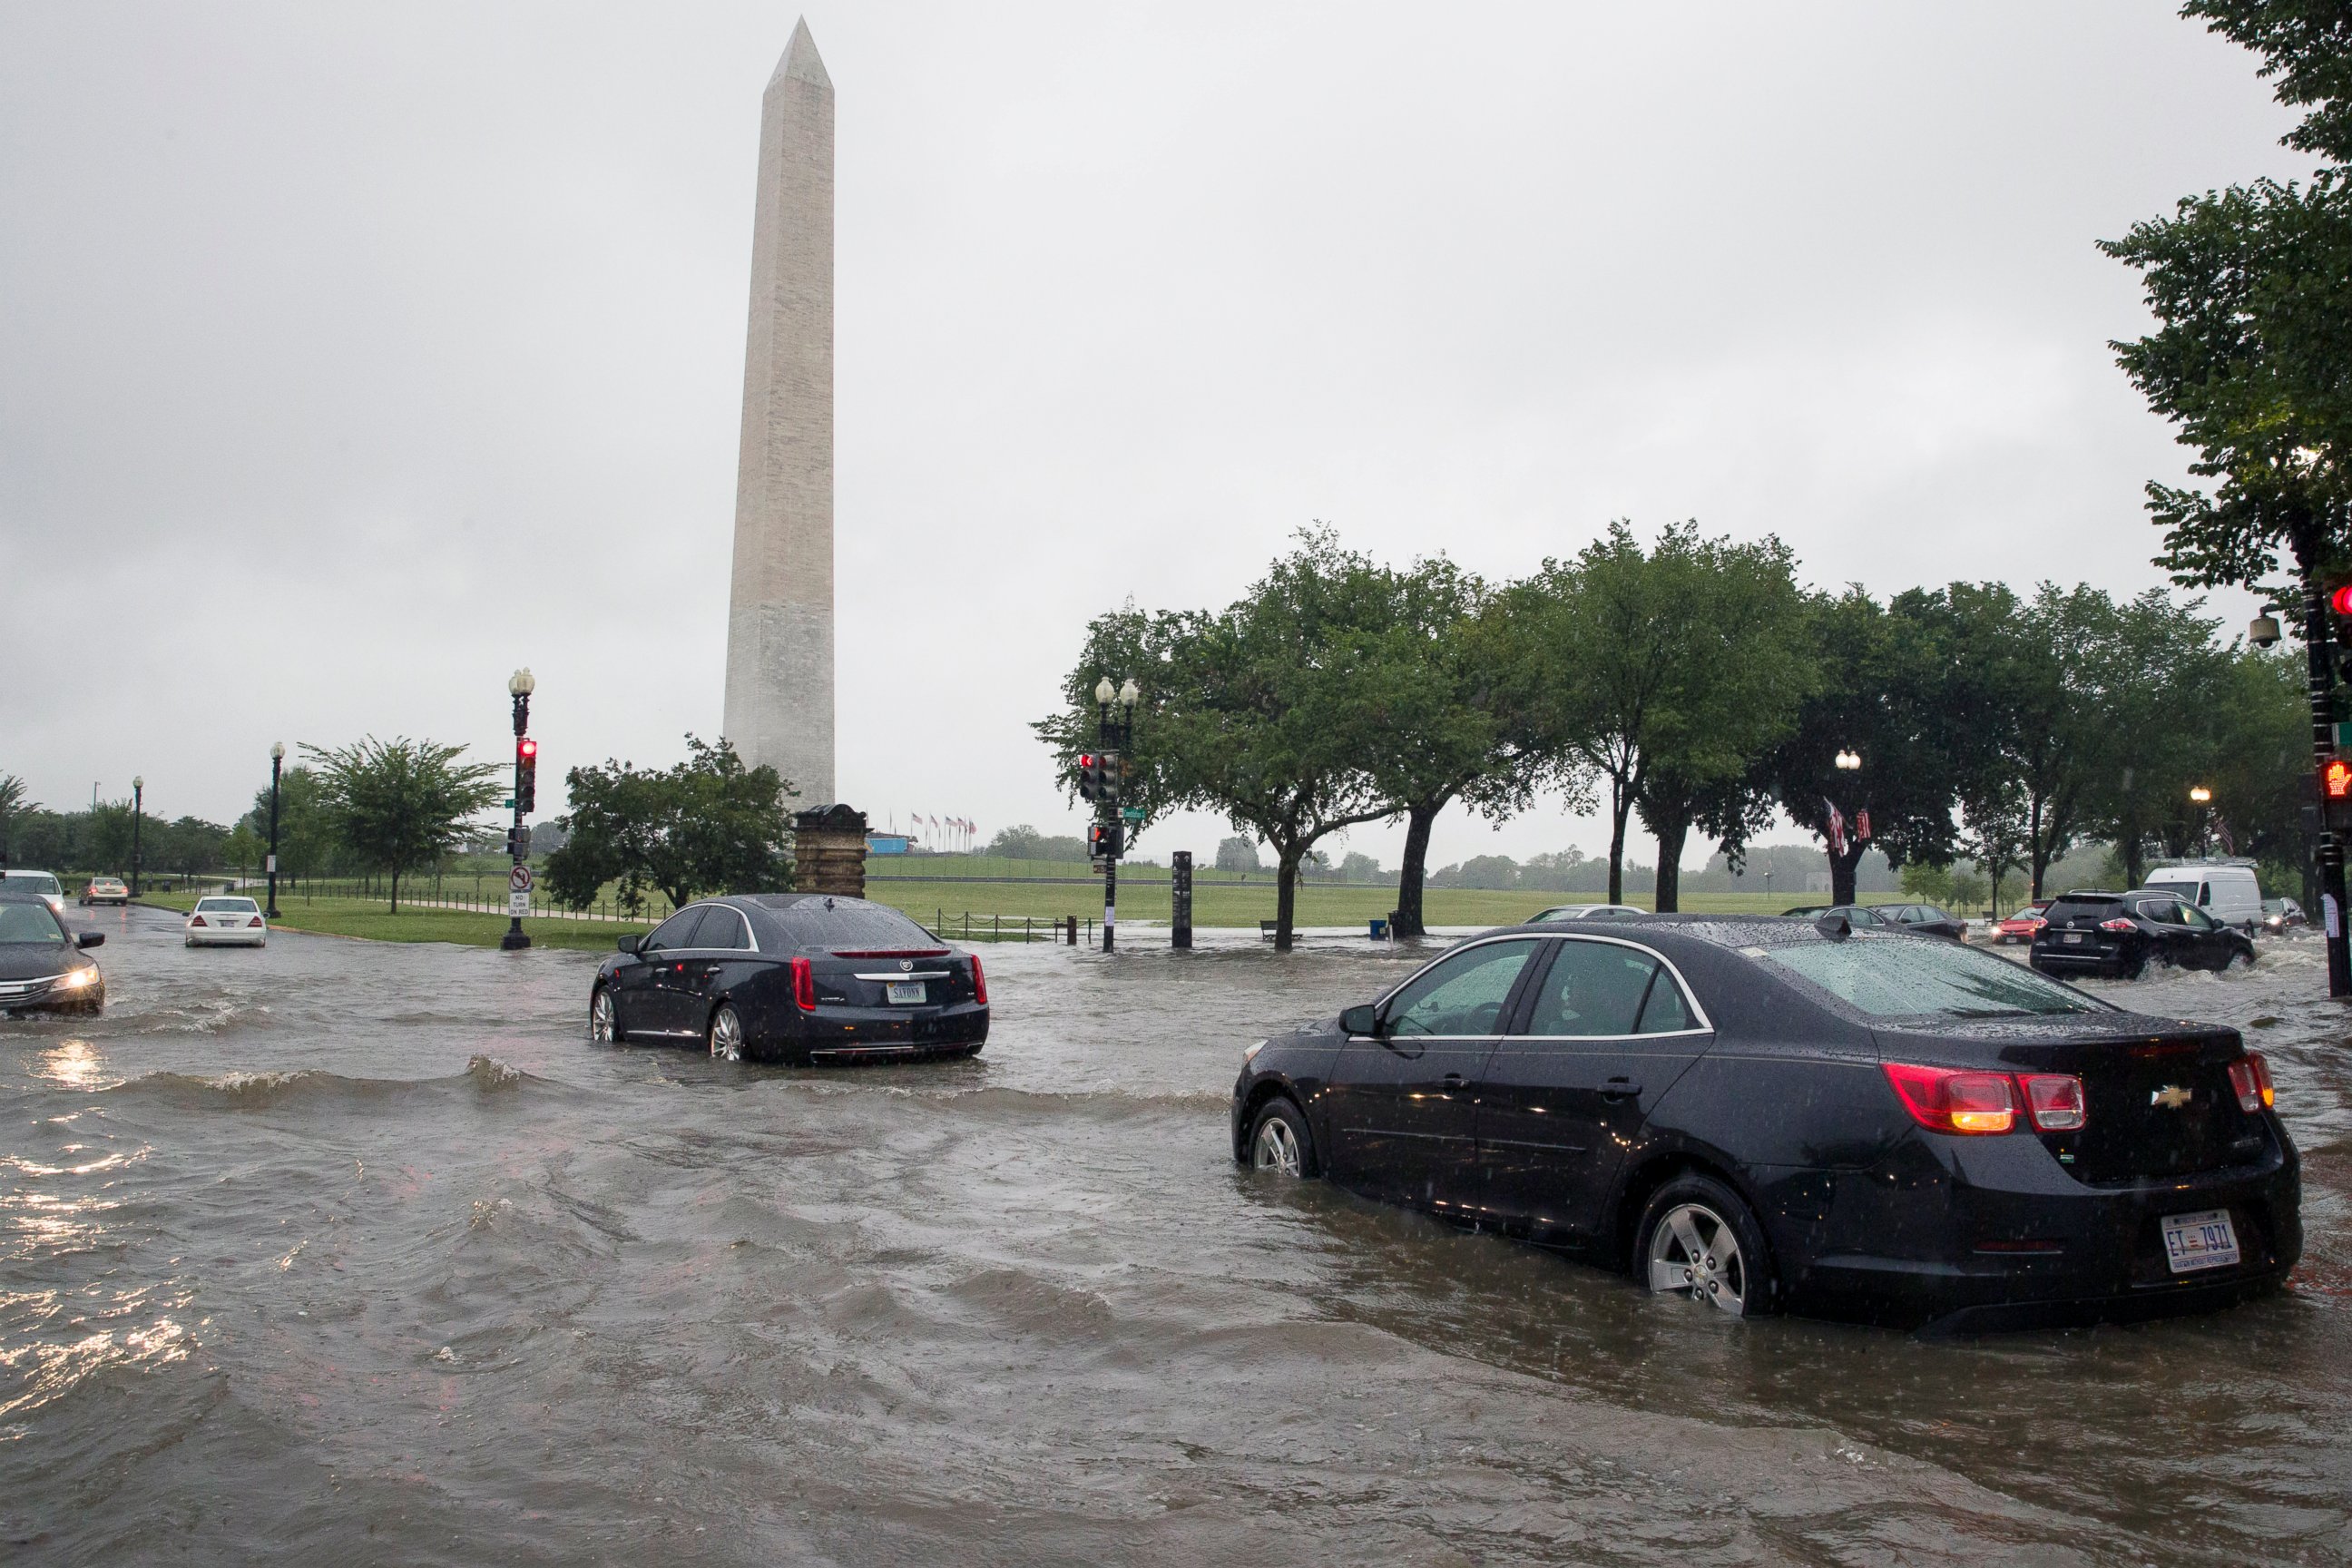 PHOTO: Heavy rainfall flooded the intersection of 15th Street and Constitution Ave., NW stalling cars in the street, Monday, July 8, 2019, in Washington near the Washington Monument.